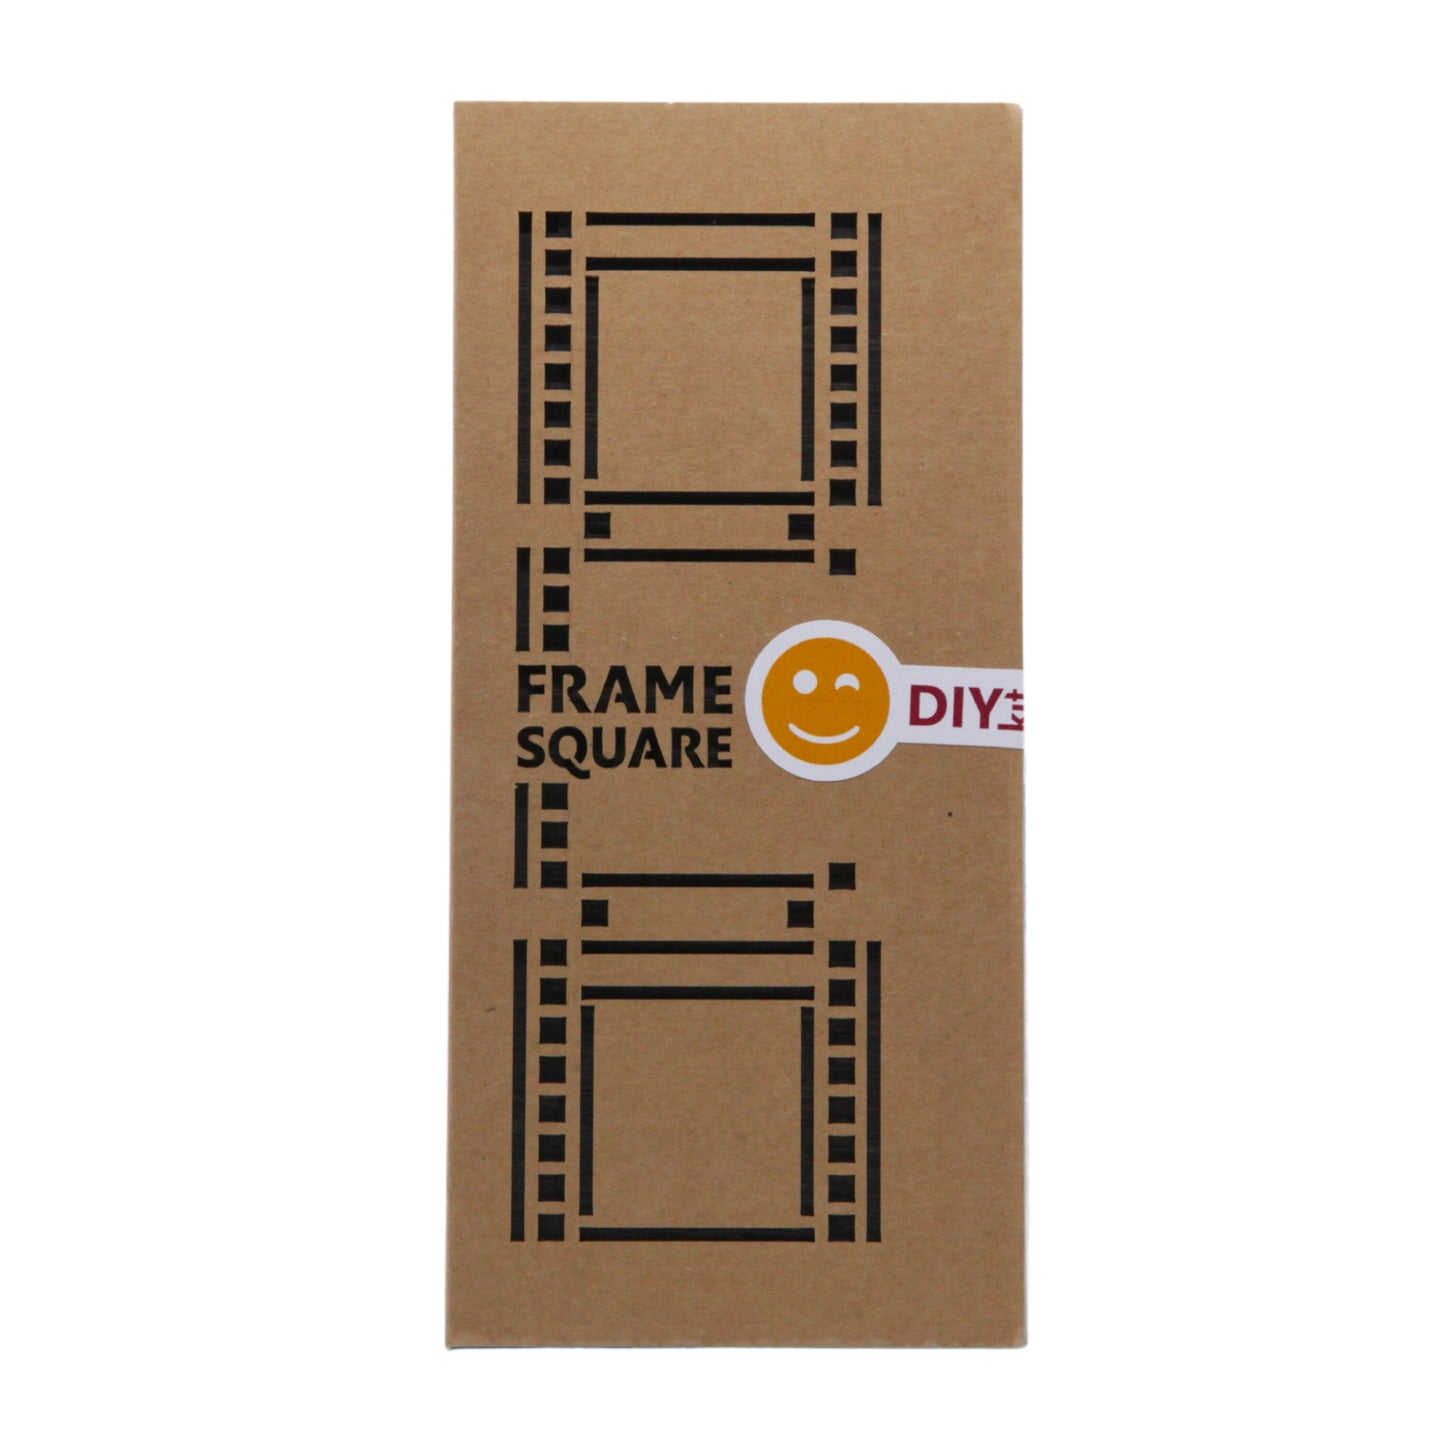 A packed set of three stained brown plywood interconnectable Instax SQUARE film photo frames for instant SQUARE photos.